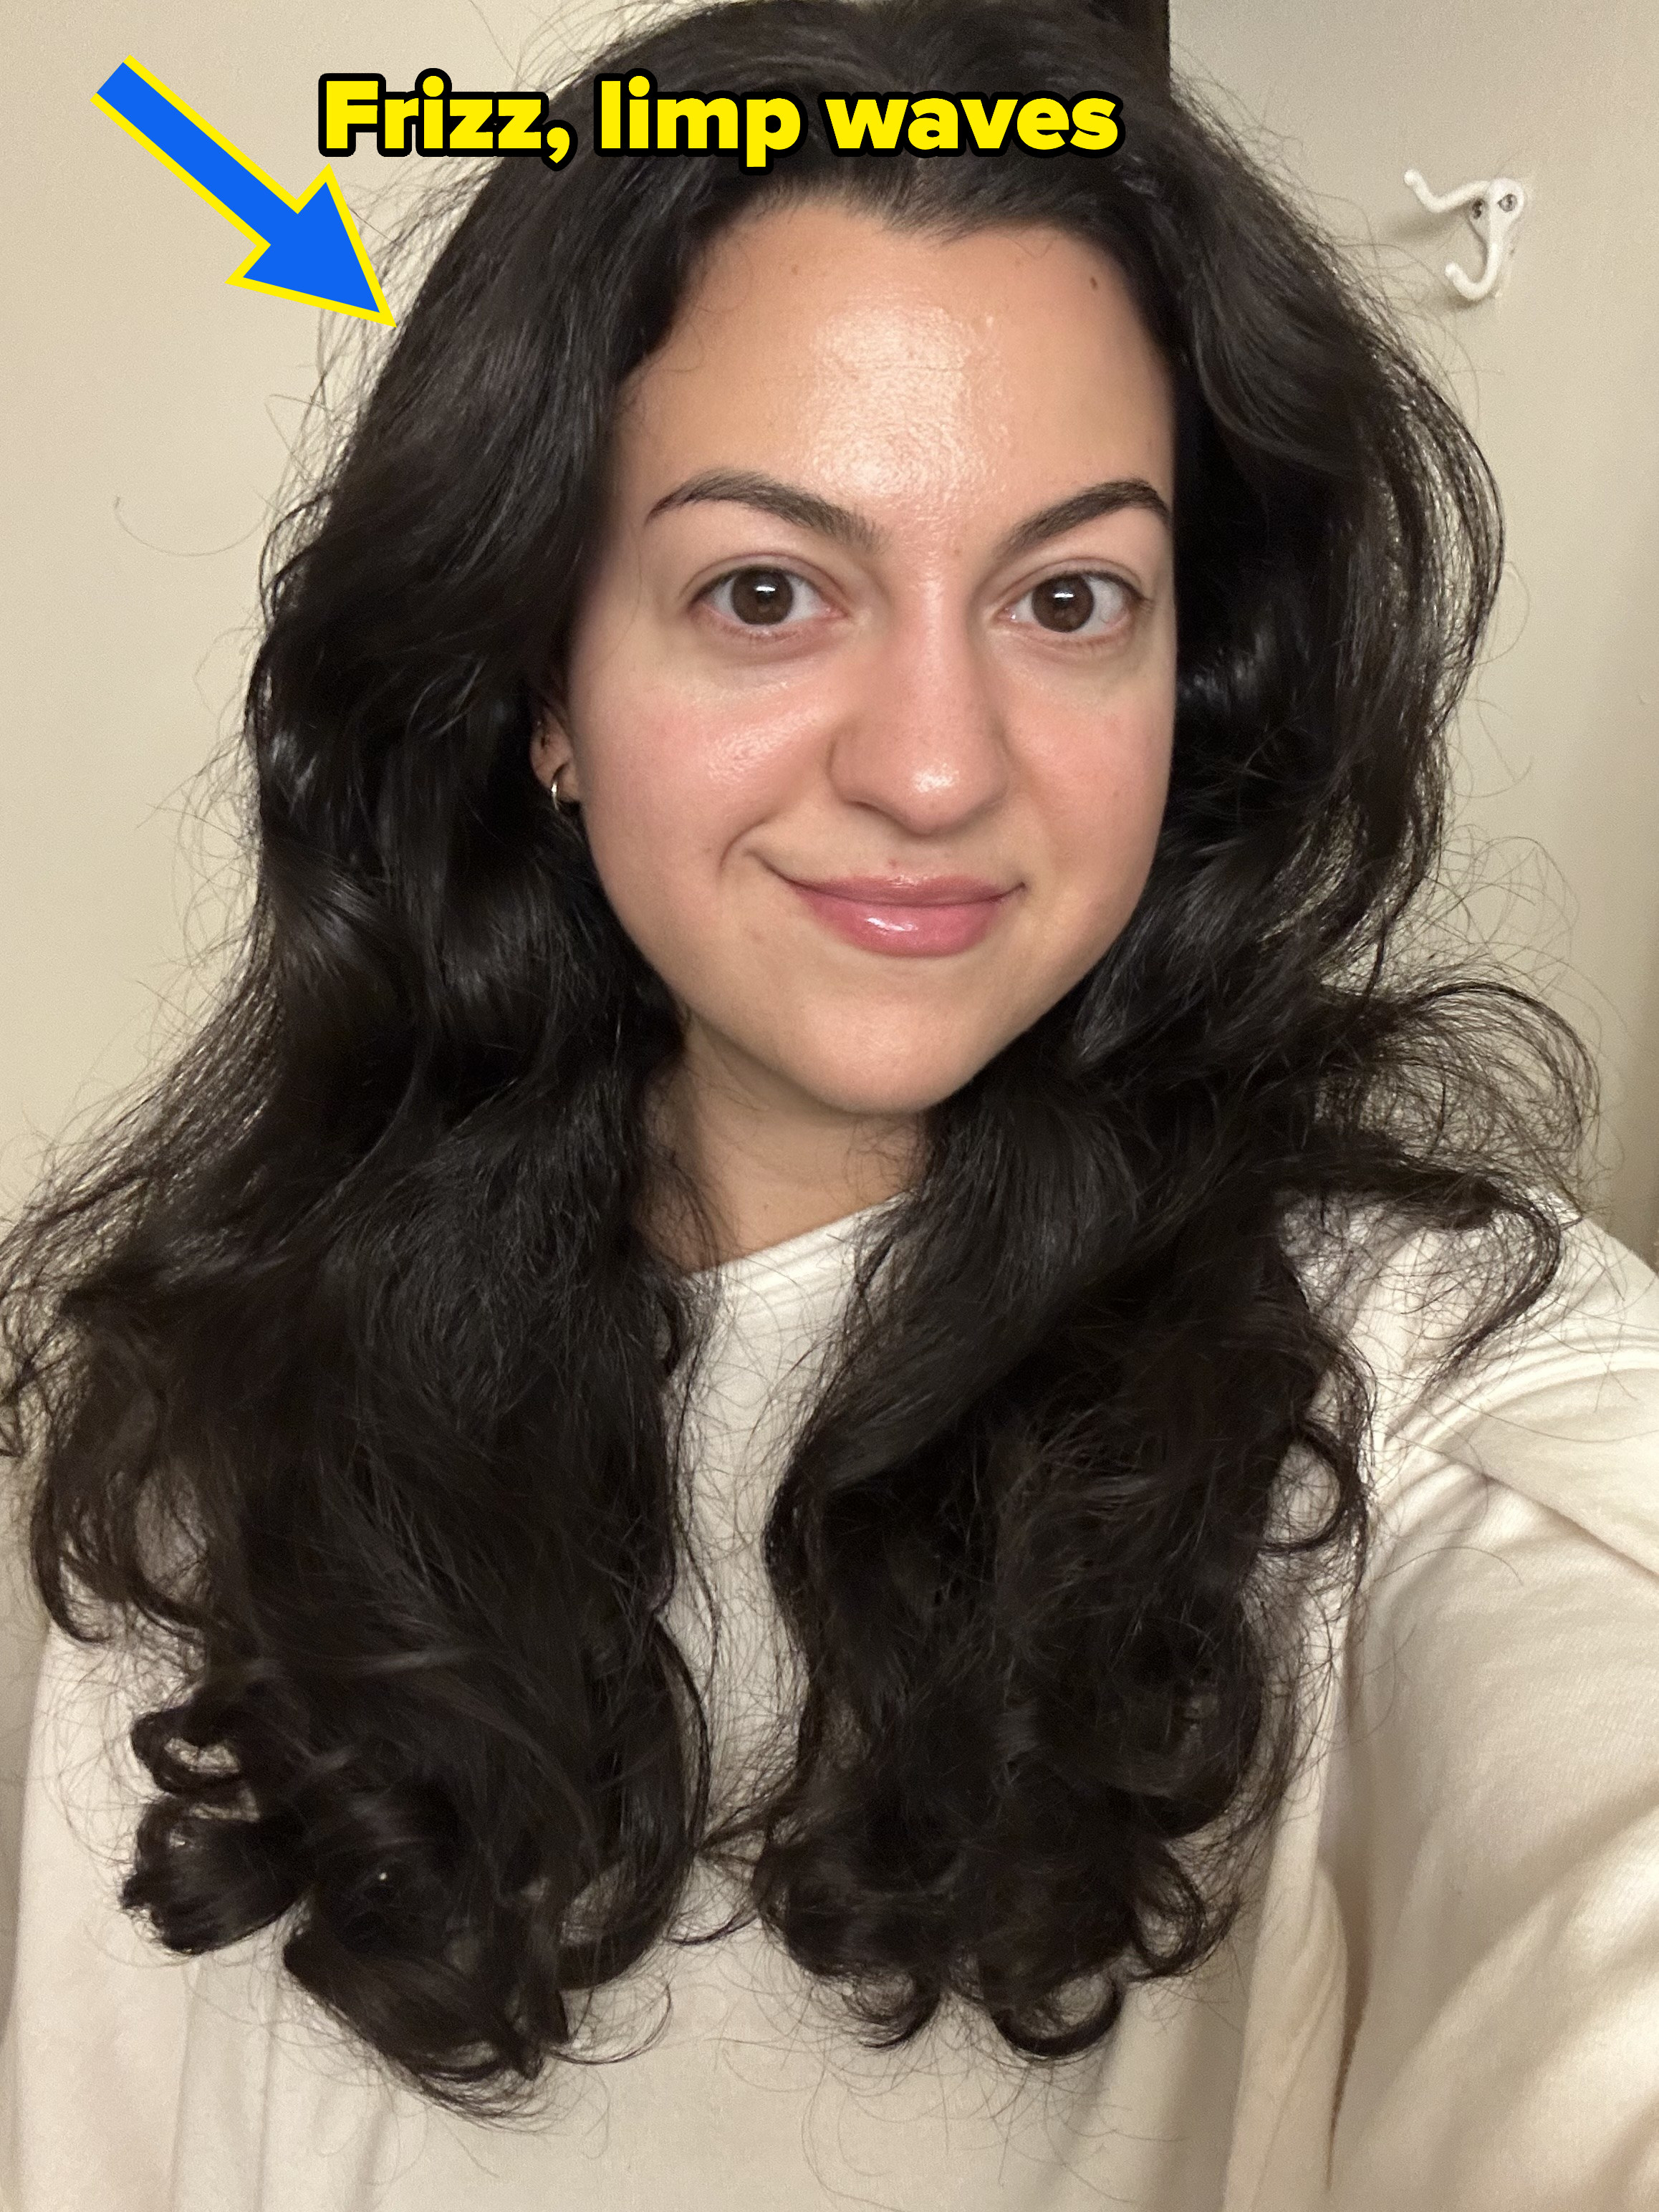 the author posing for a selfie showing her hair